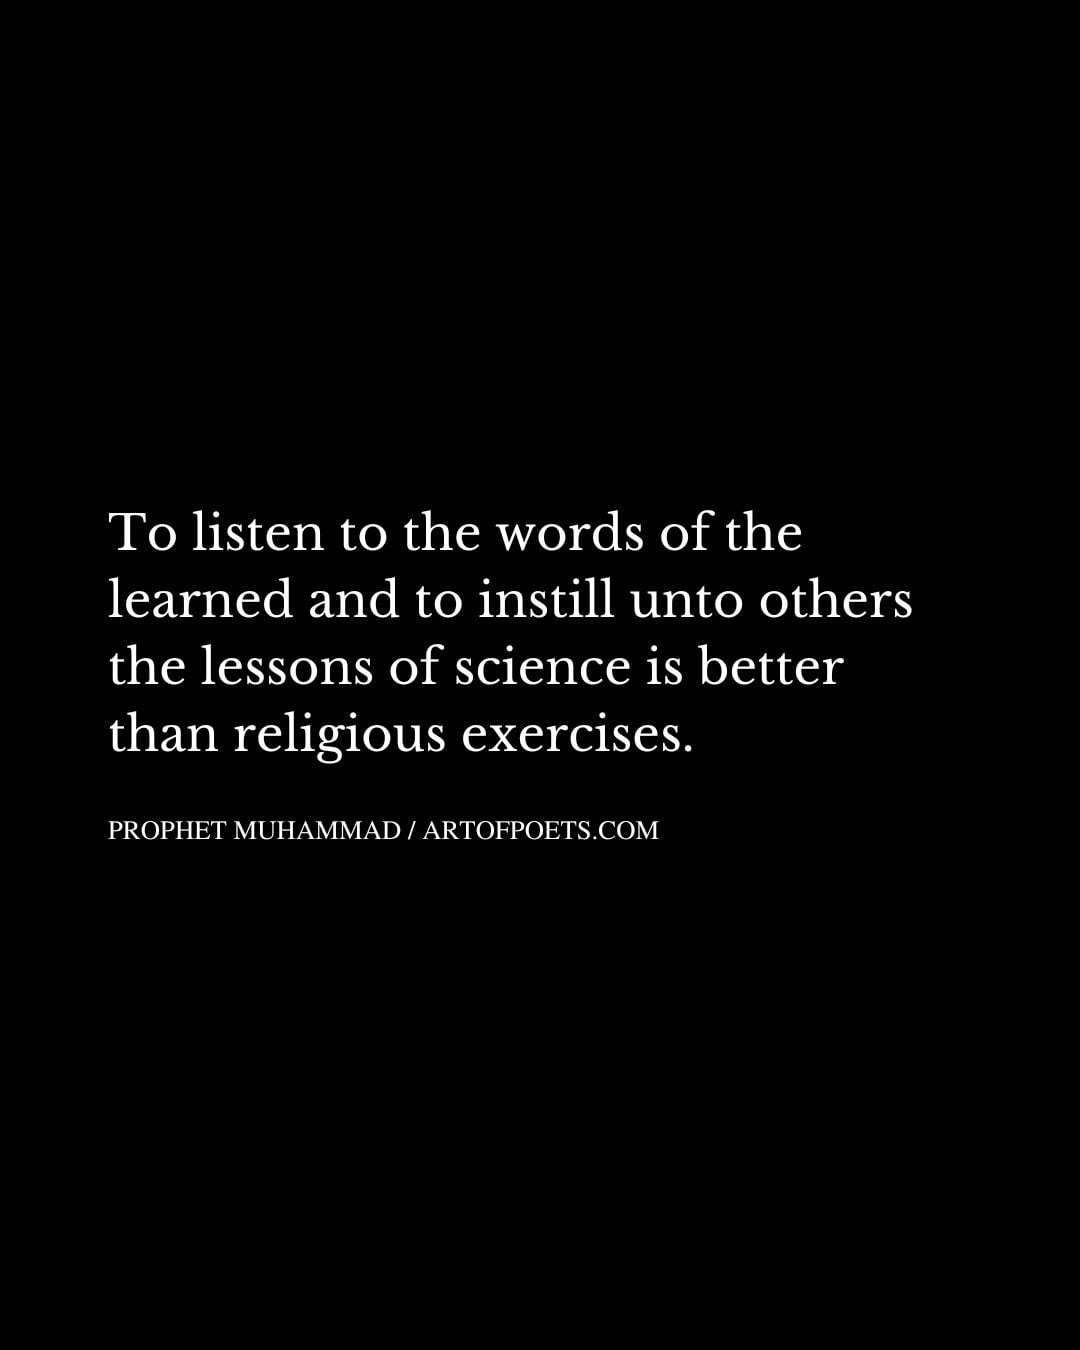 To listen to the words of the learned and to instill unto others the lessons of science is better than religious